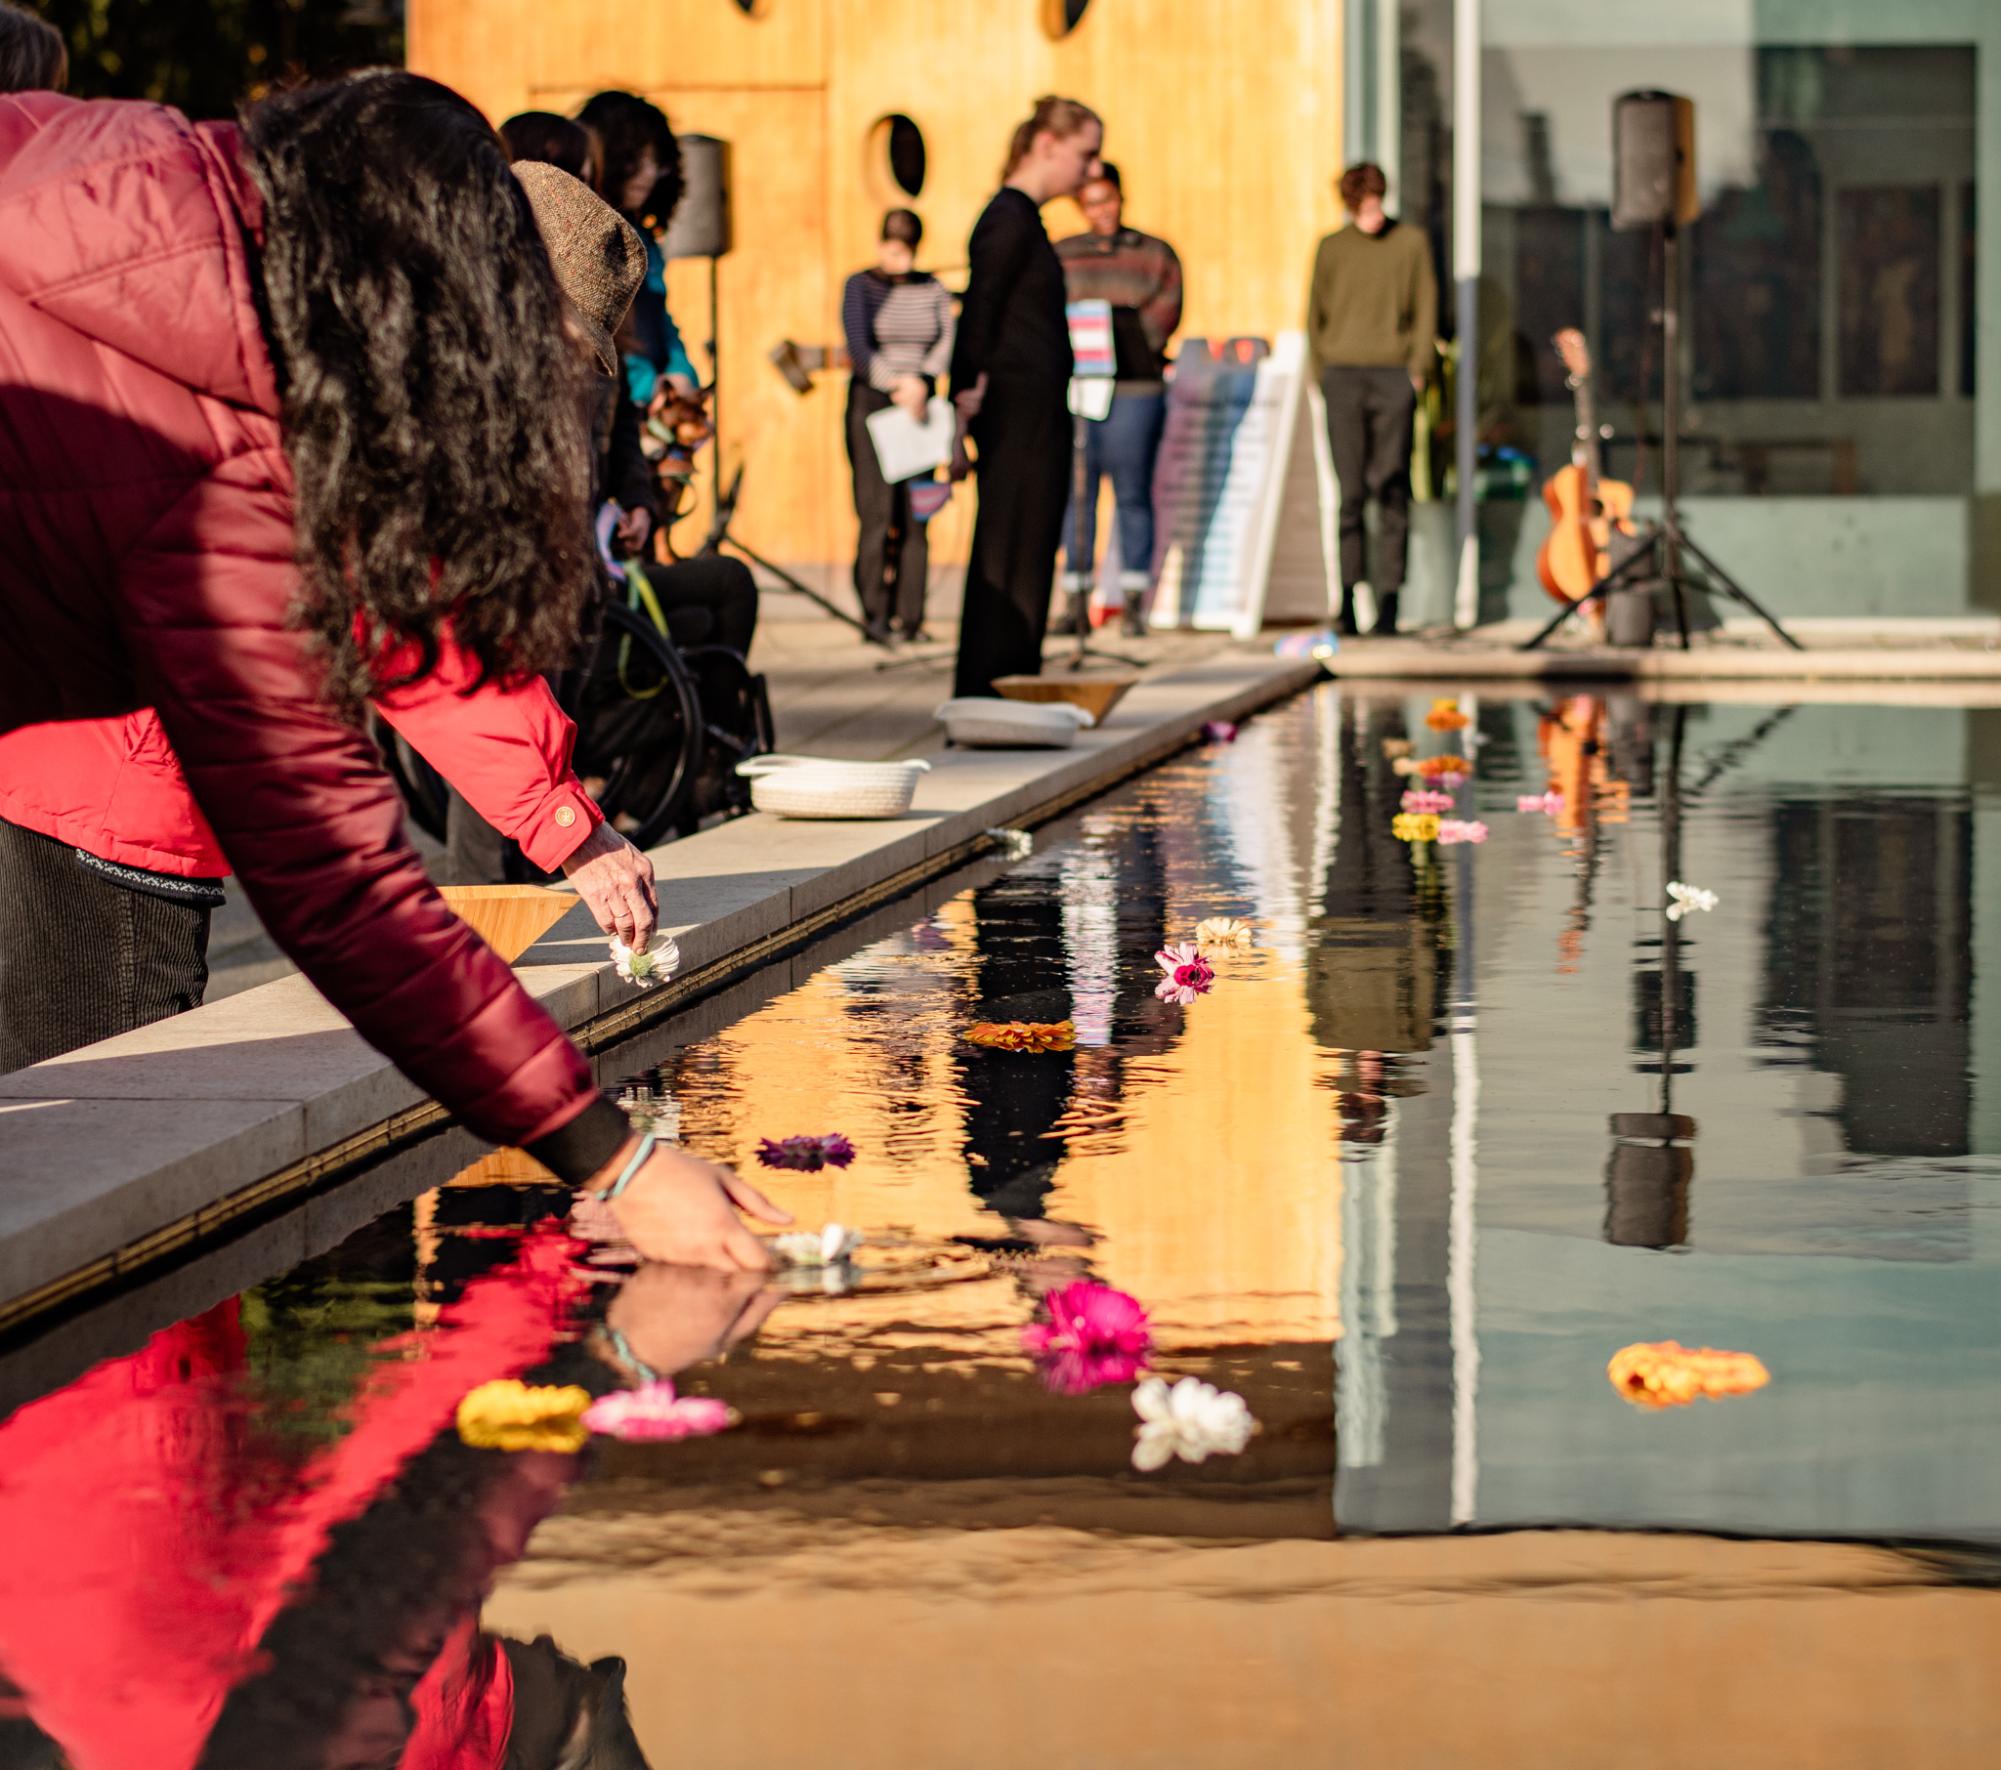 SU community placing flowers in the Reflection Pool during the Transgender Day of Remembrance Vigil.